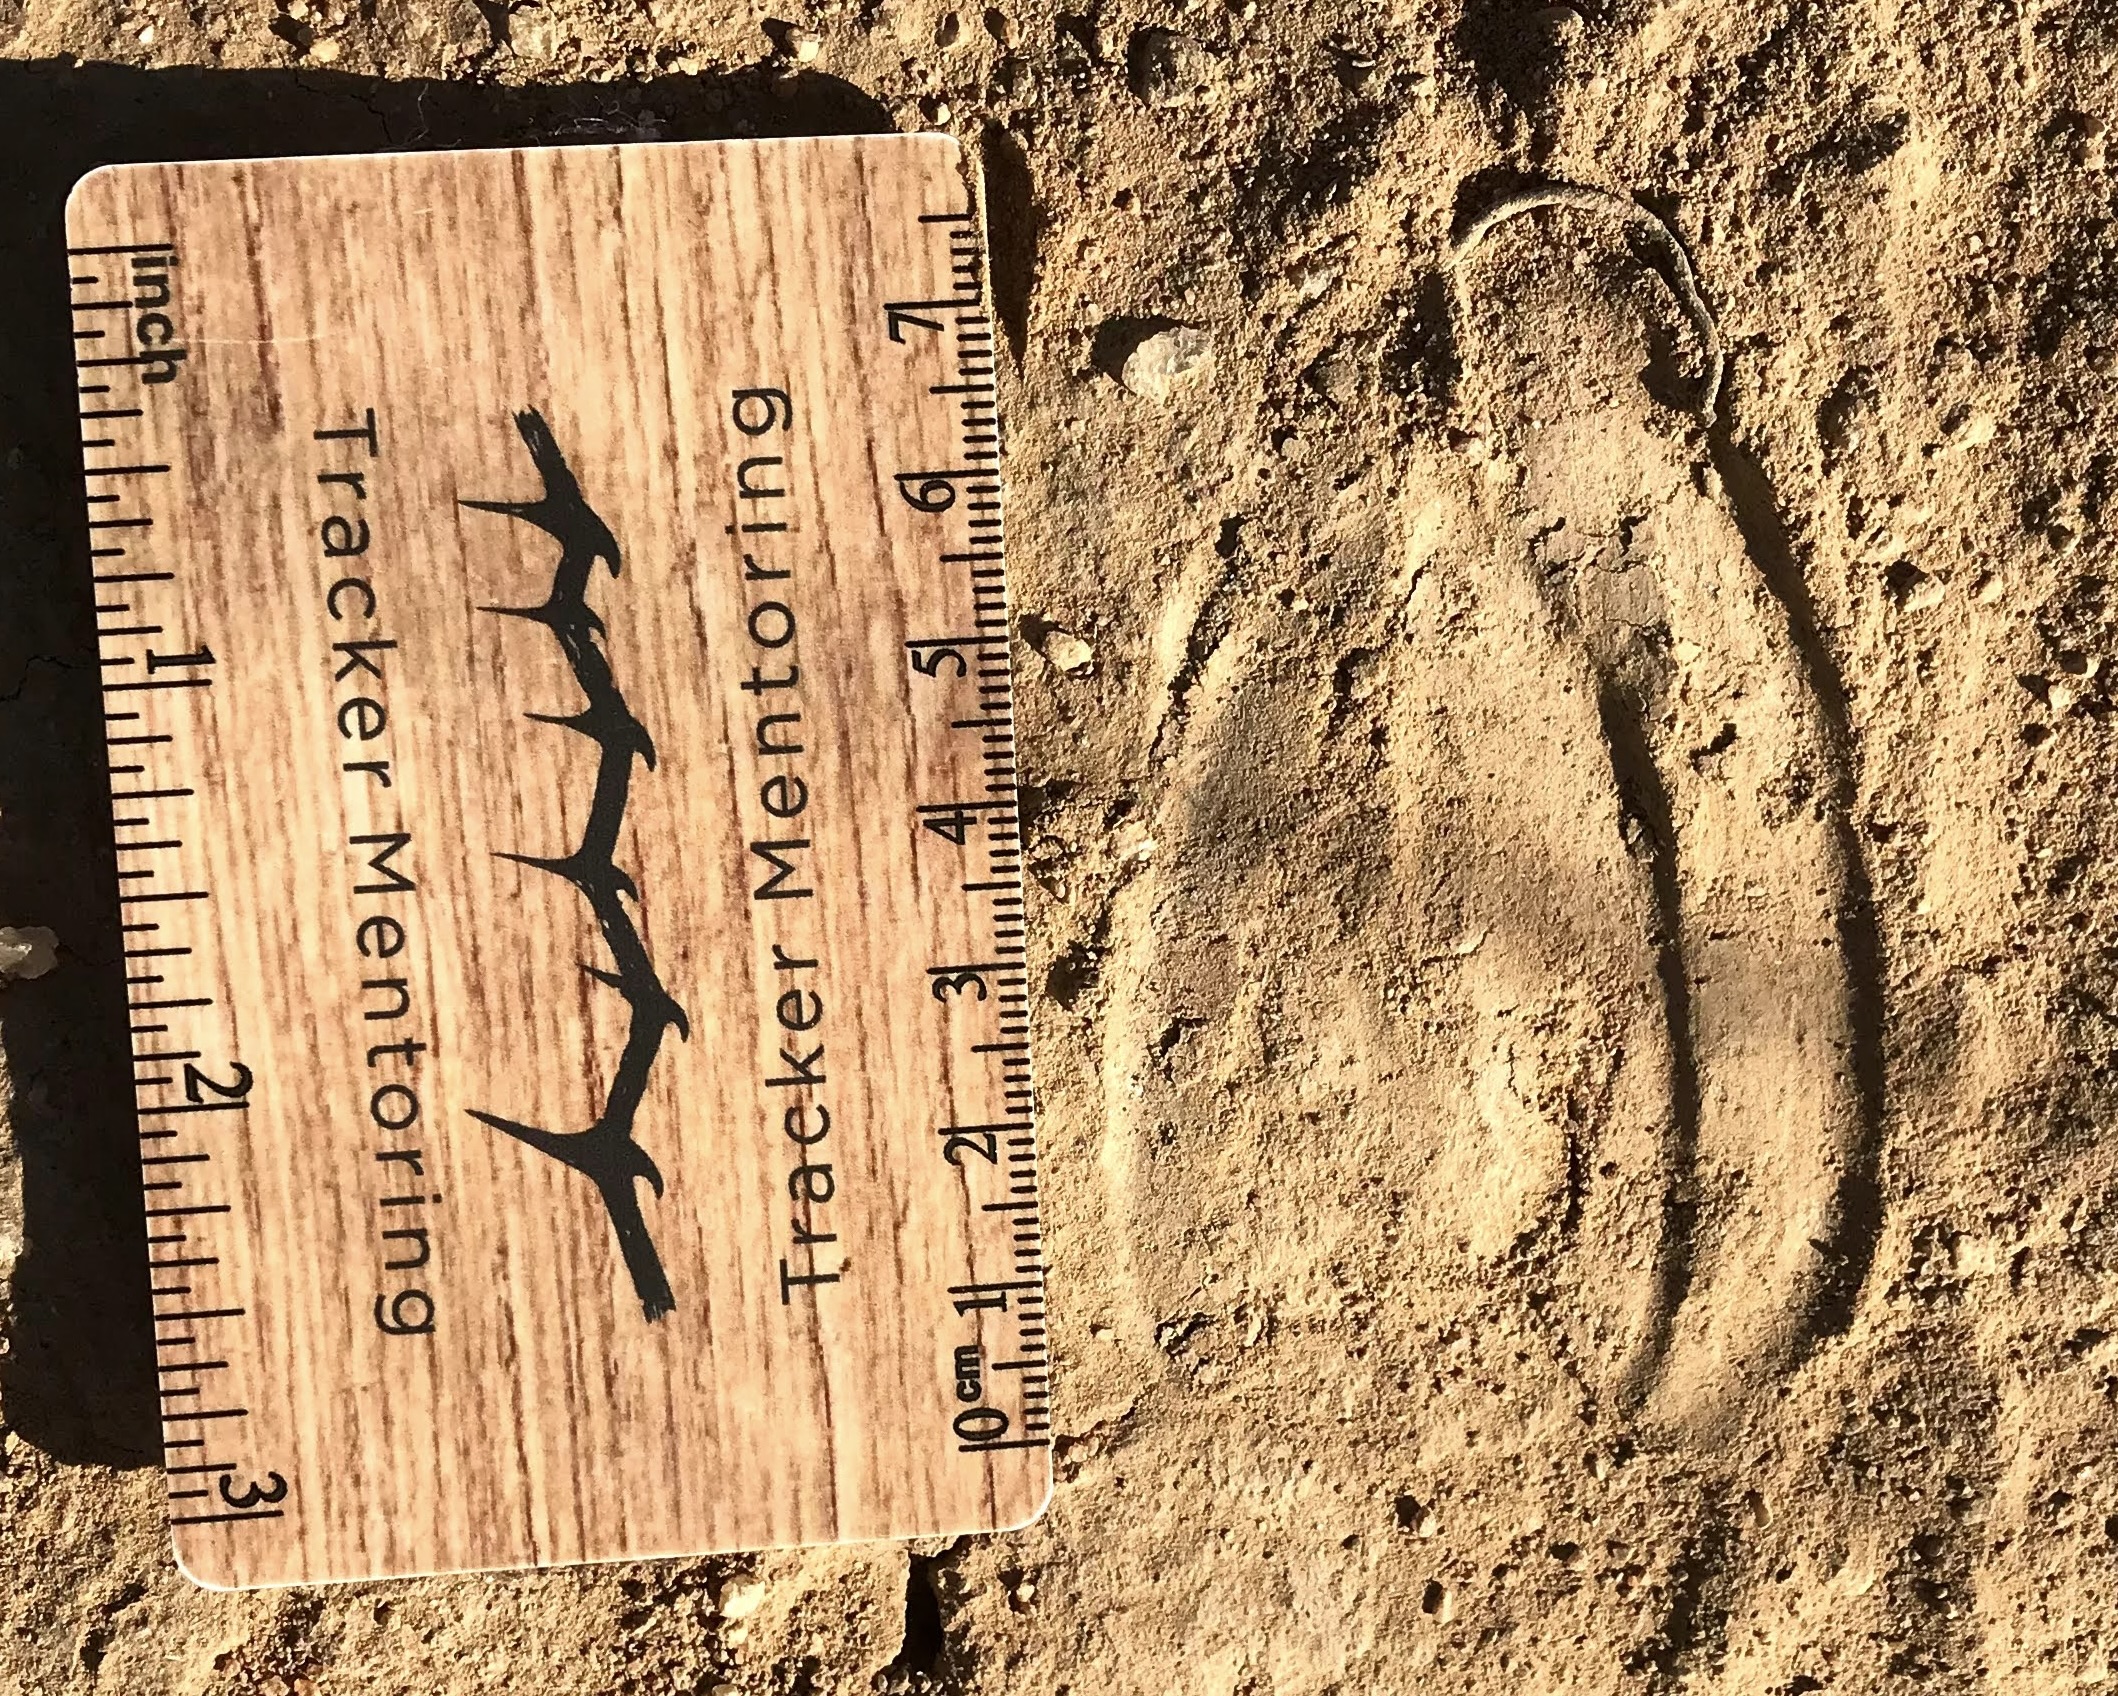 Mammal, ungulate, Kudu tracks, Greater Kruger area of South Africa, Sandy Reed